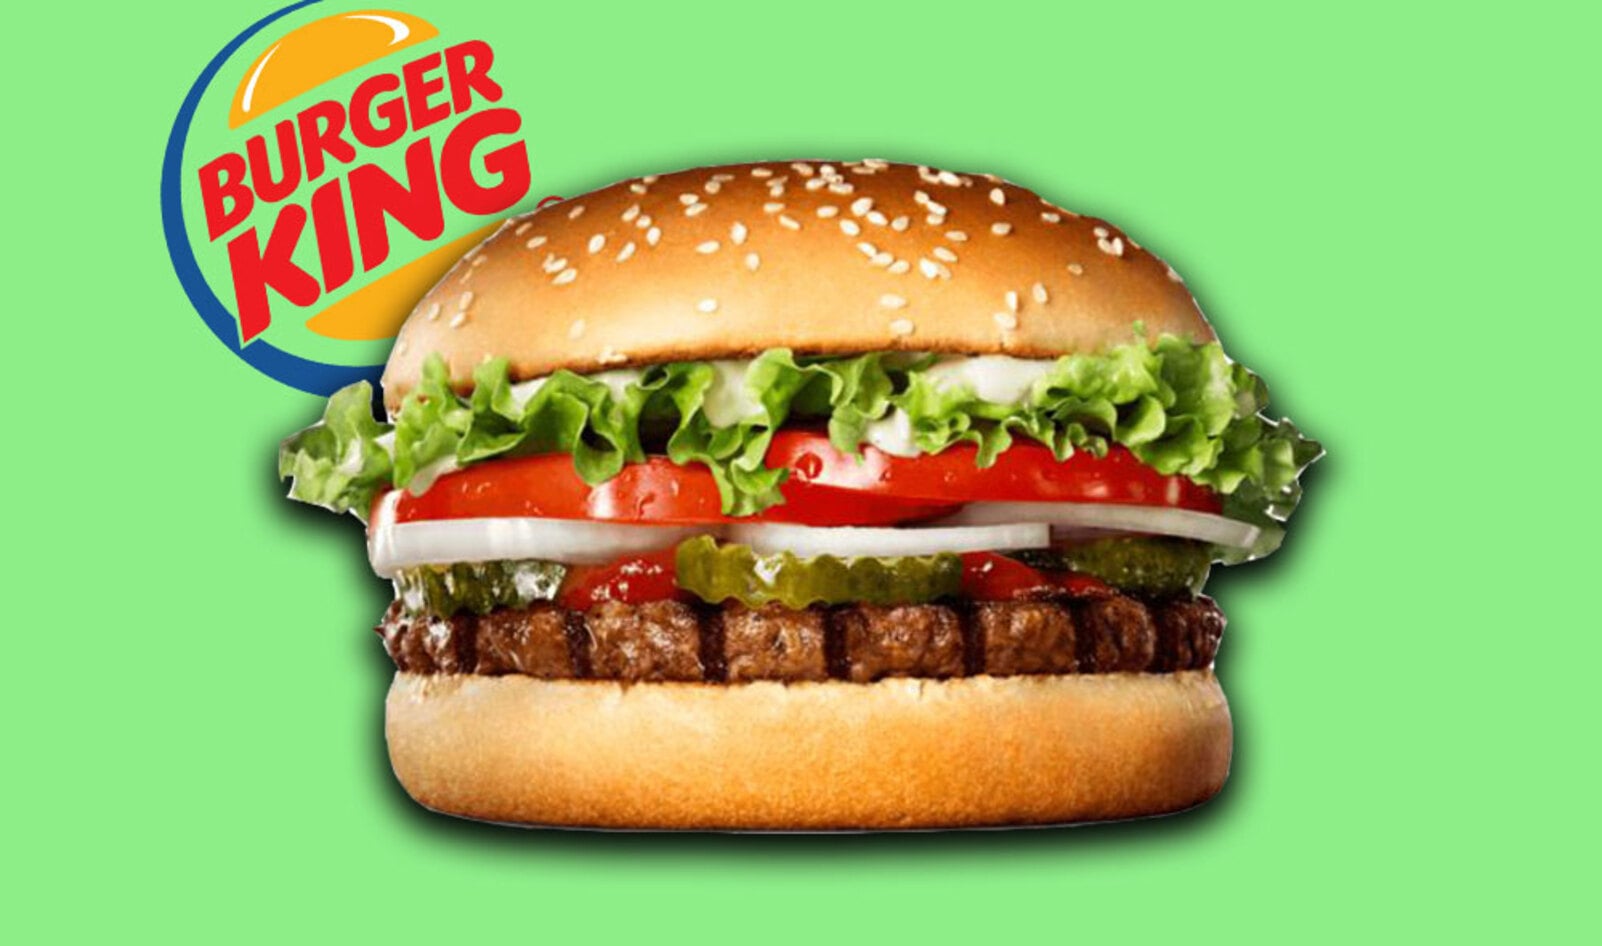 Burger King CEO Is “All in” on Plant-Based Food&nbsp;